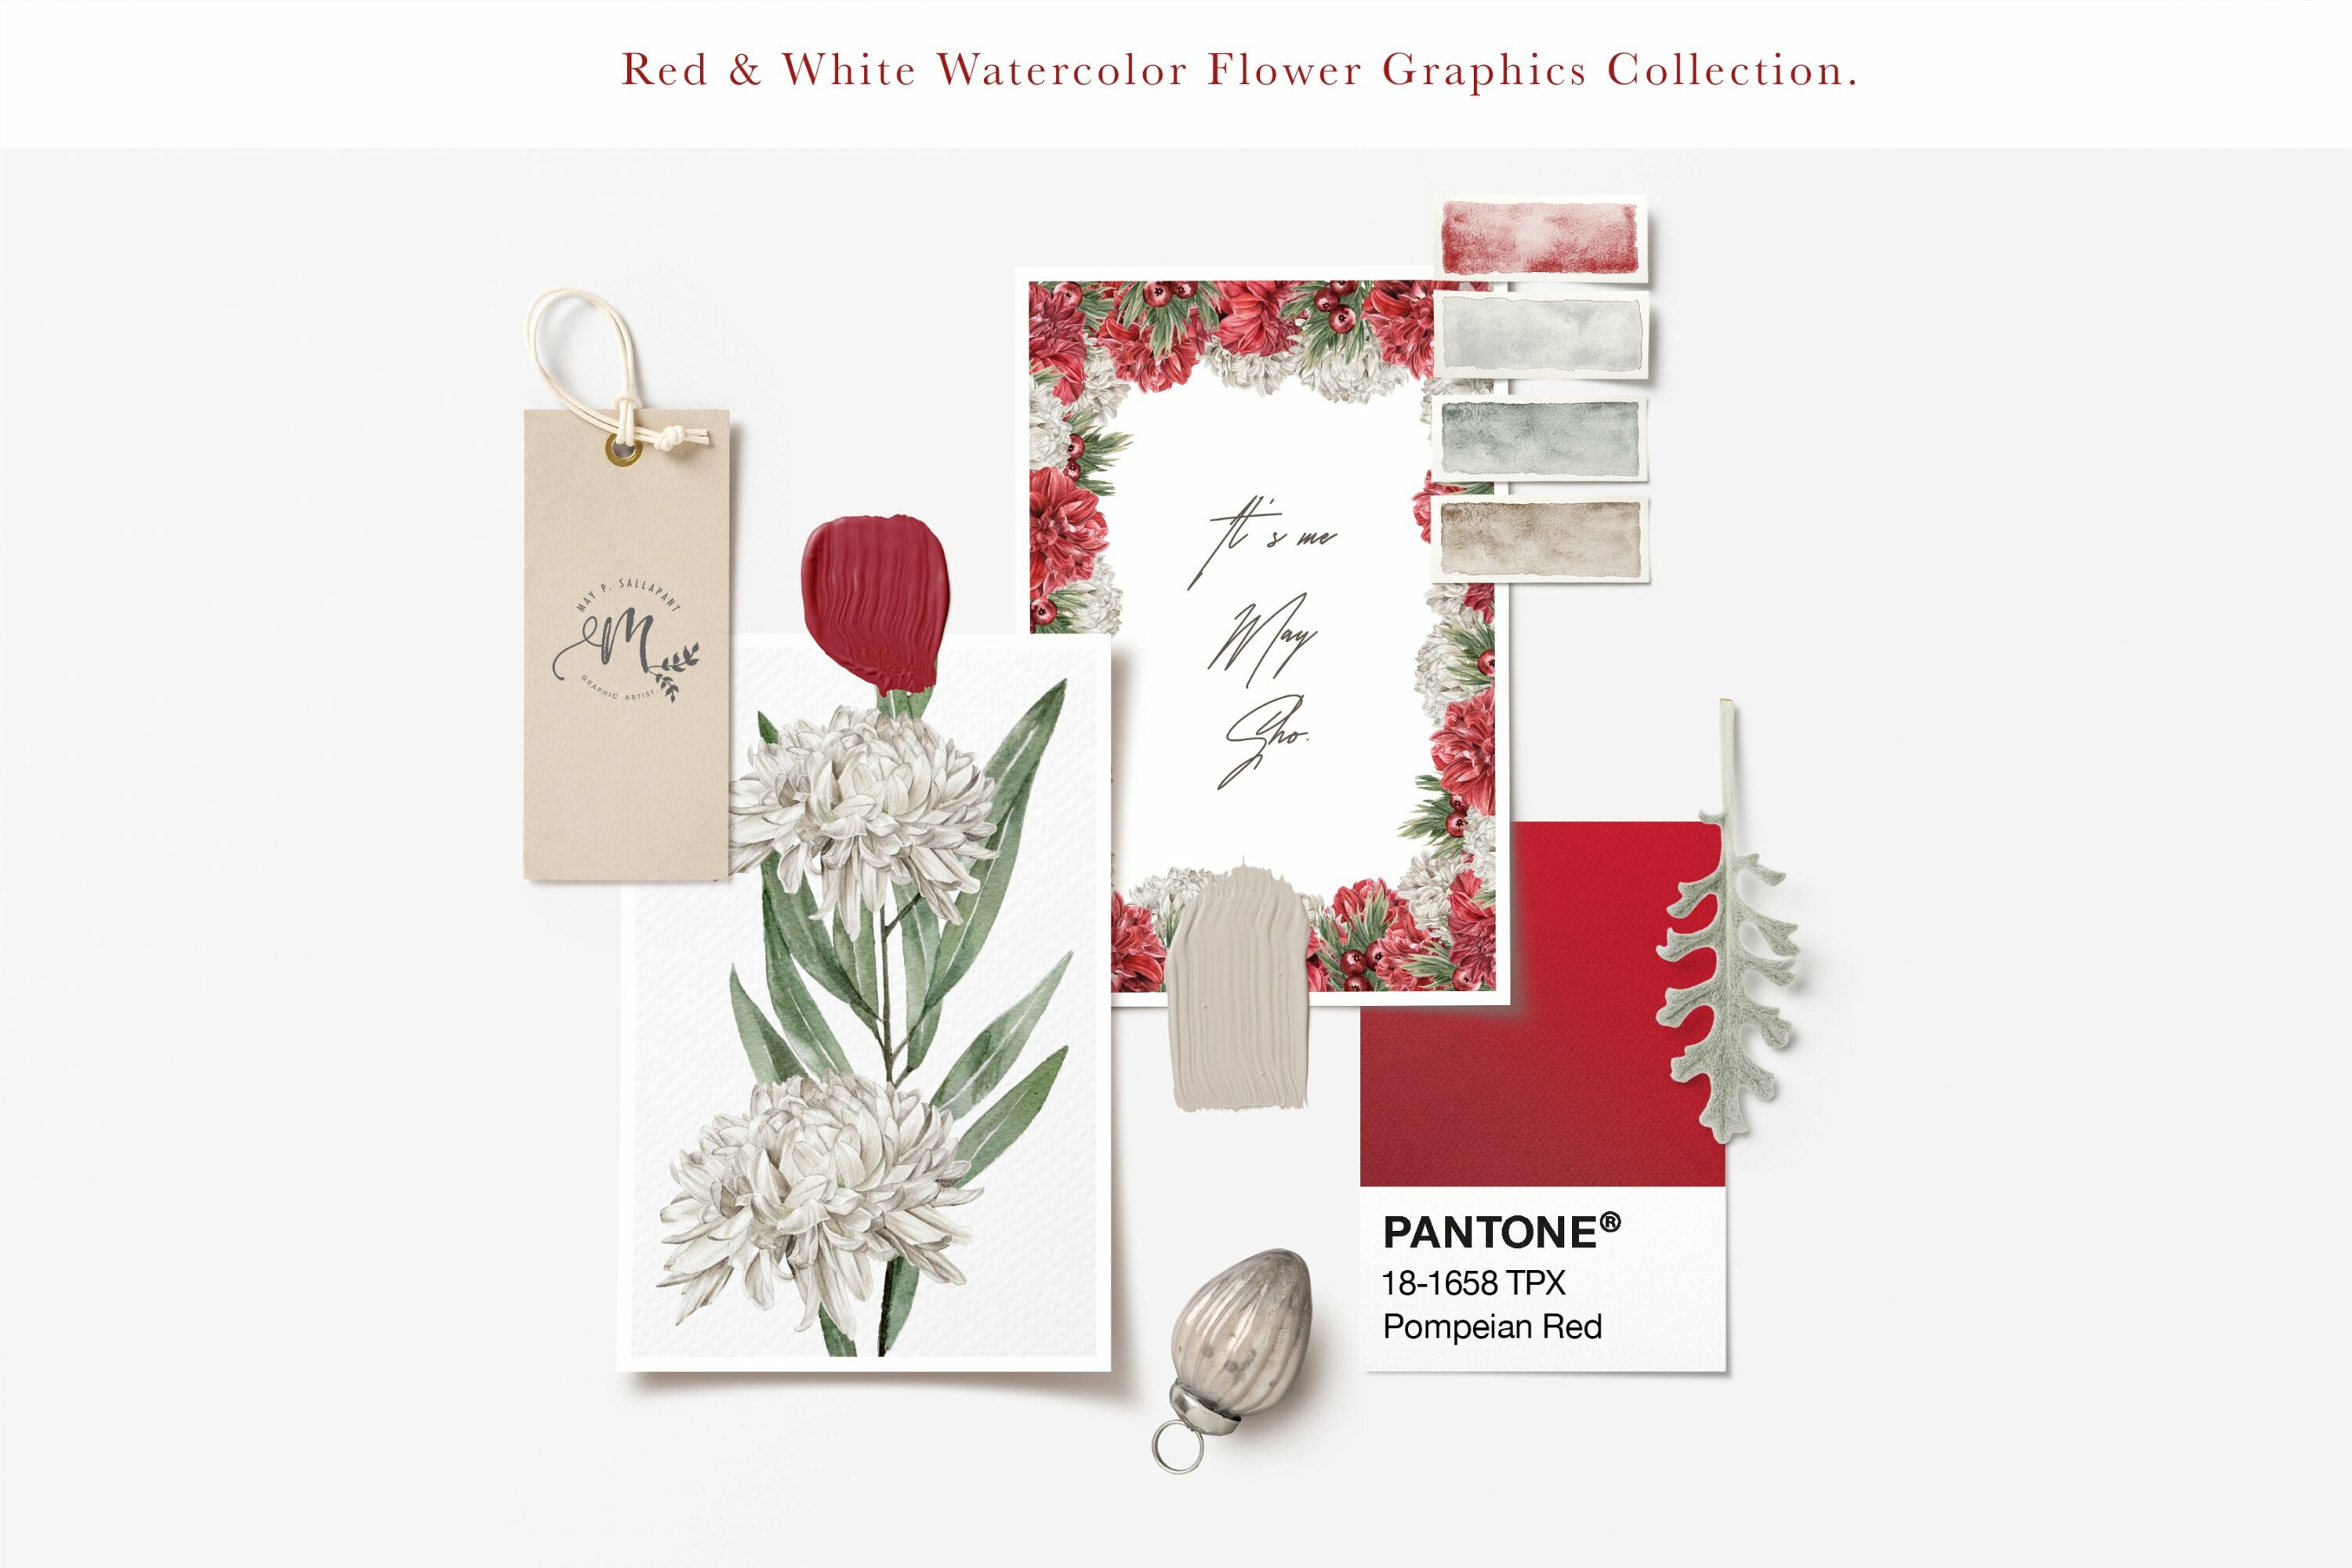 Red Burgundy & White is a floral graphic collection in the color theme of red (burgundy), white, and forest green.